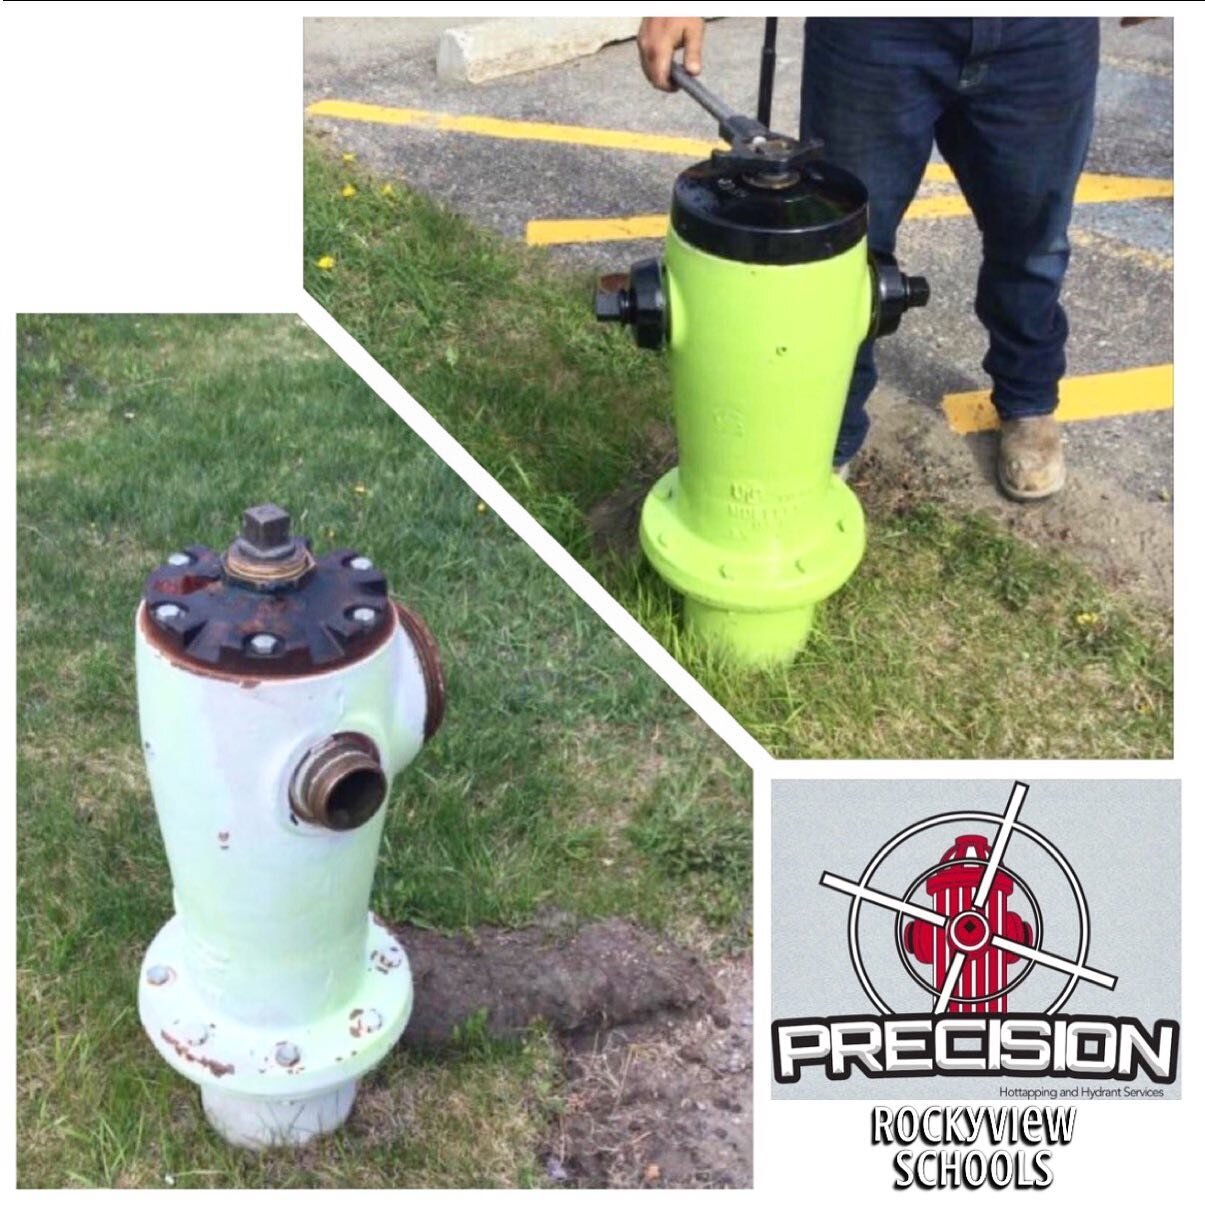 Paint and Repair for our Rocky-view schools. Summer season is about to ramp up and our book is getting filled quickly! Call or email to reserve your spot 🤝🔥

#hottapping #plumbing #construction #trucks #hydrant #fyp #yyc #alberta #f4f #work #britis